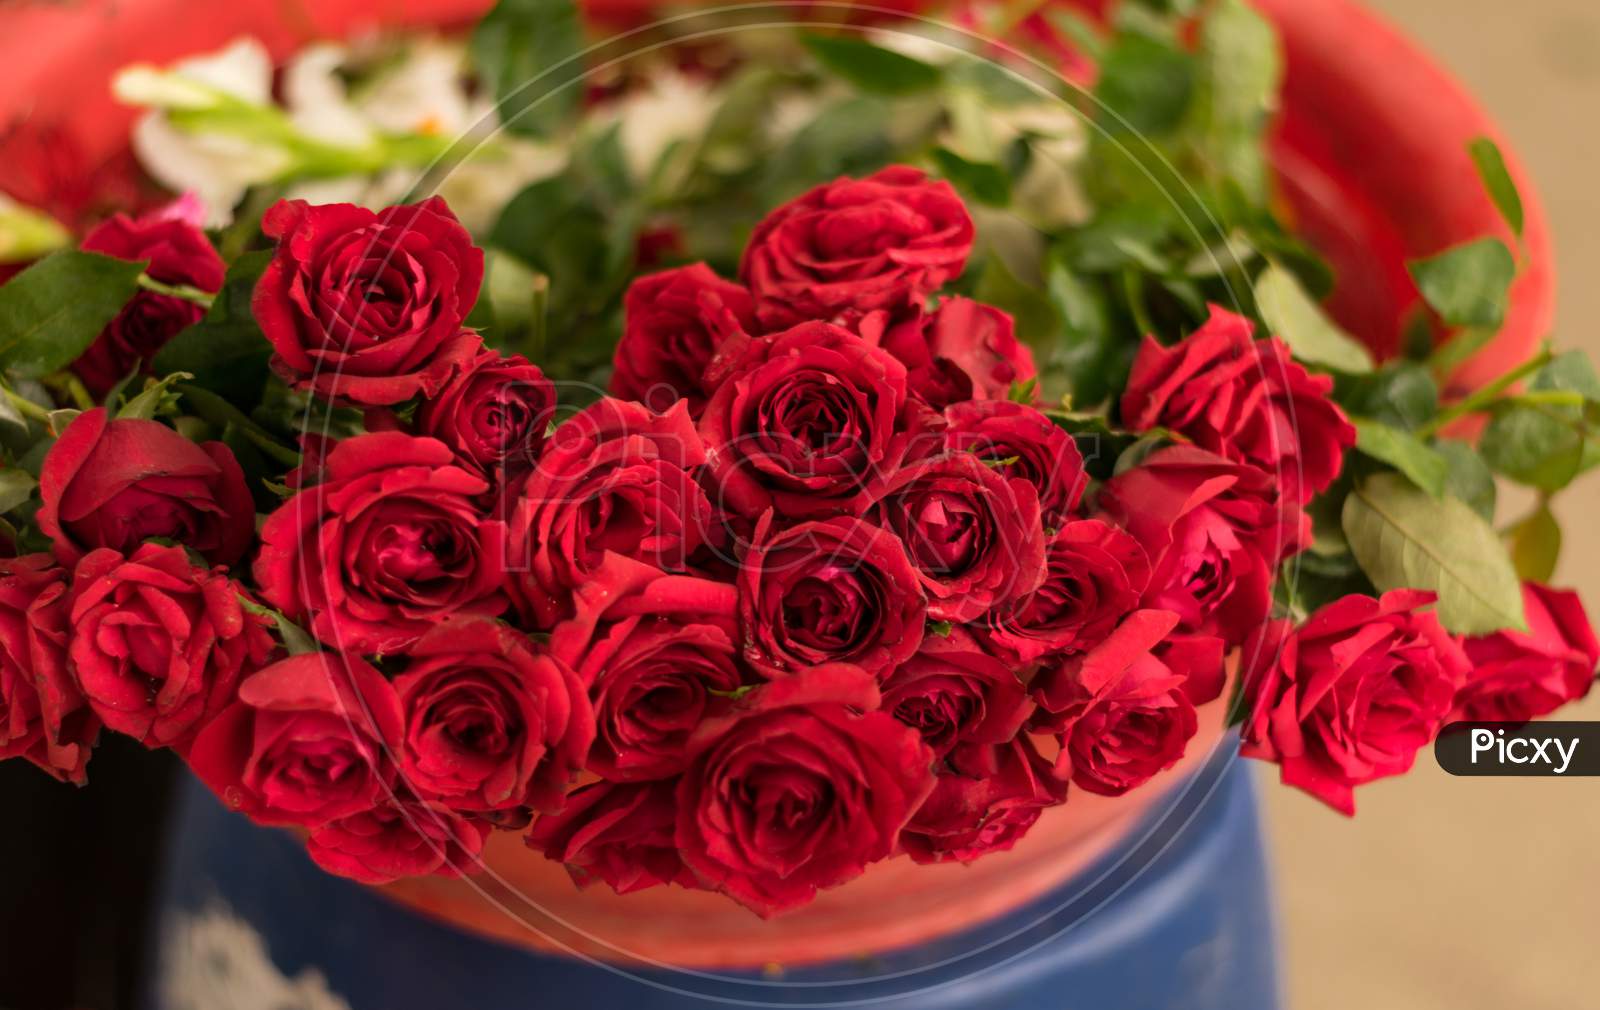 Red Roses Displayed In A Blue Pot